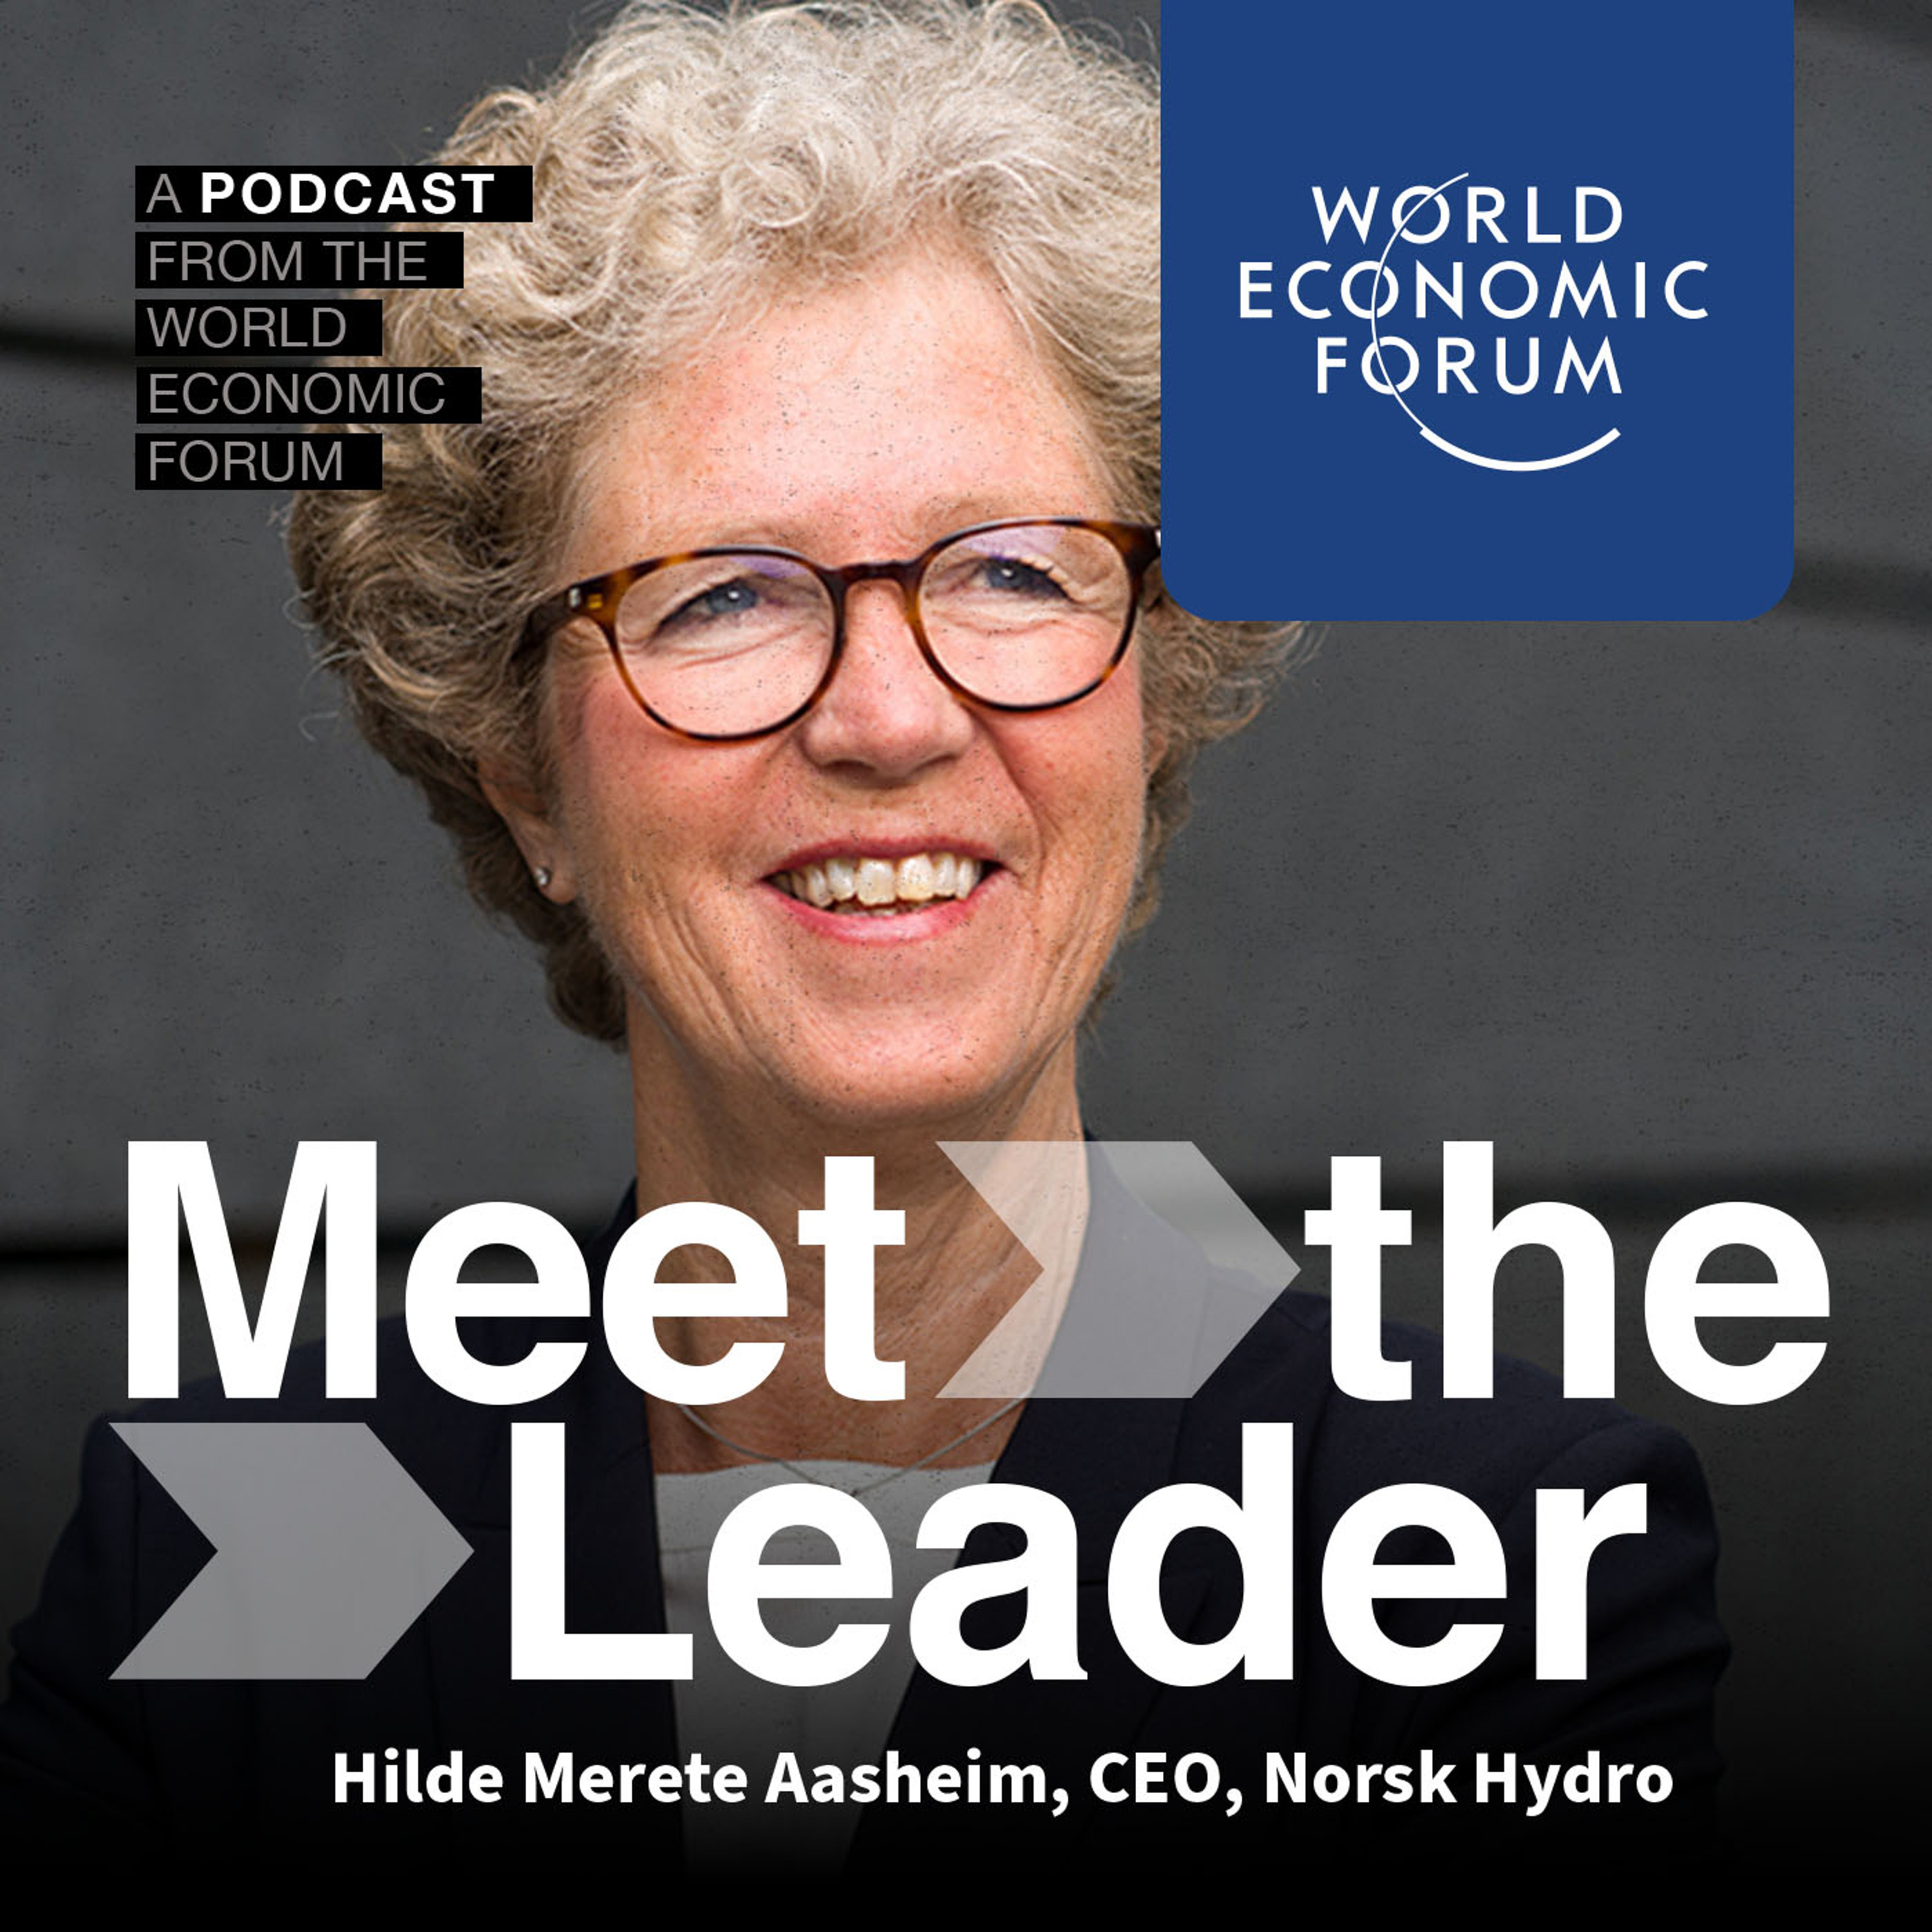 Speak last, lean on your team, and one CEO's other top lessons learned: Norsk Hydro